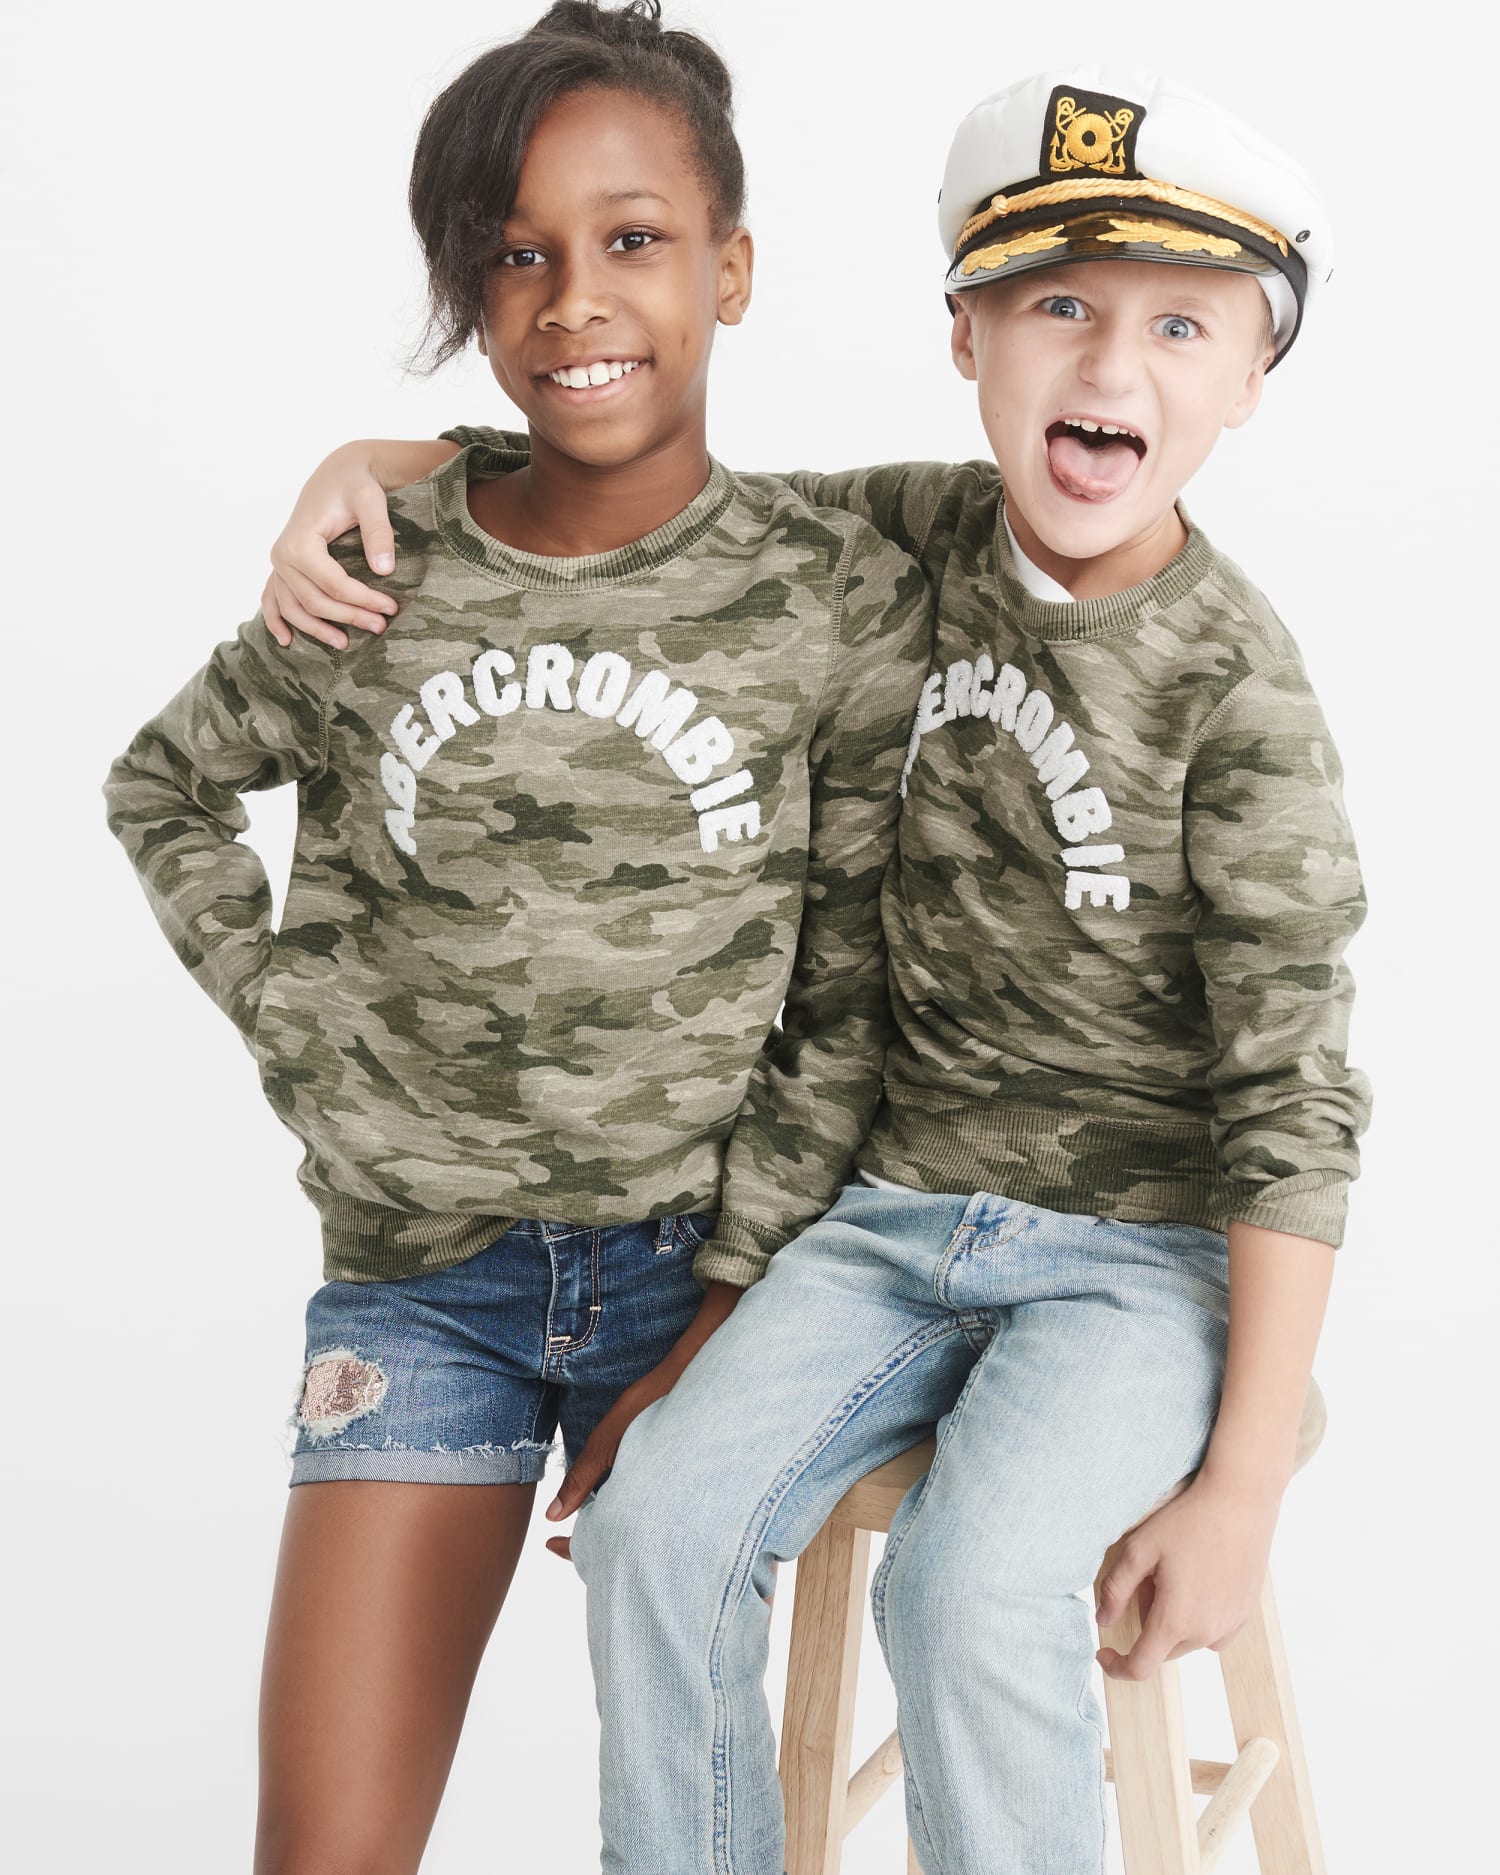 Abercrombie u0026 Fitch releases gender-neutral clothing line for kids